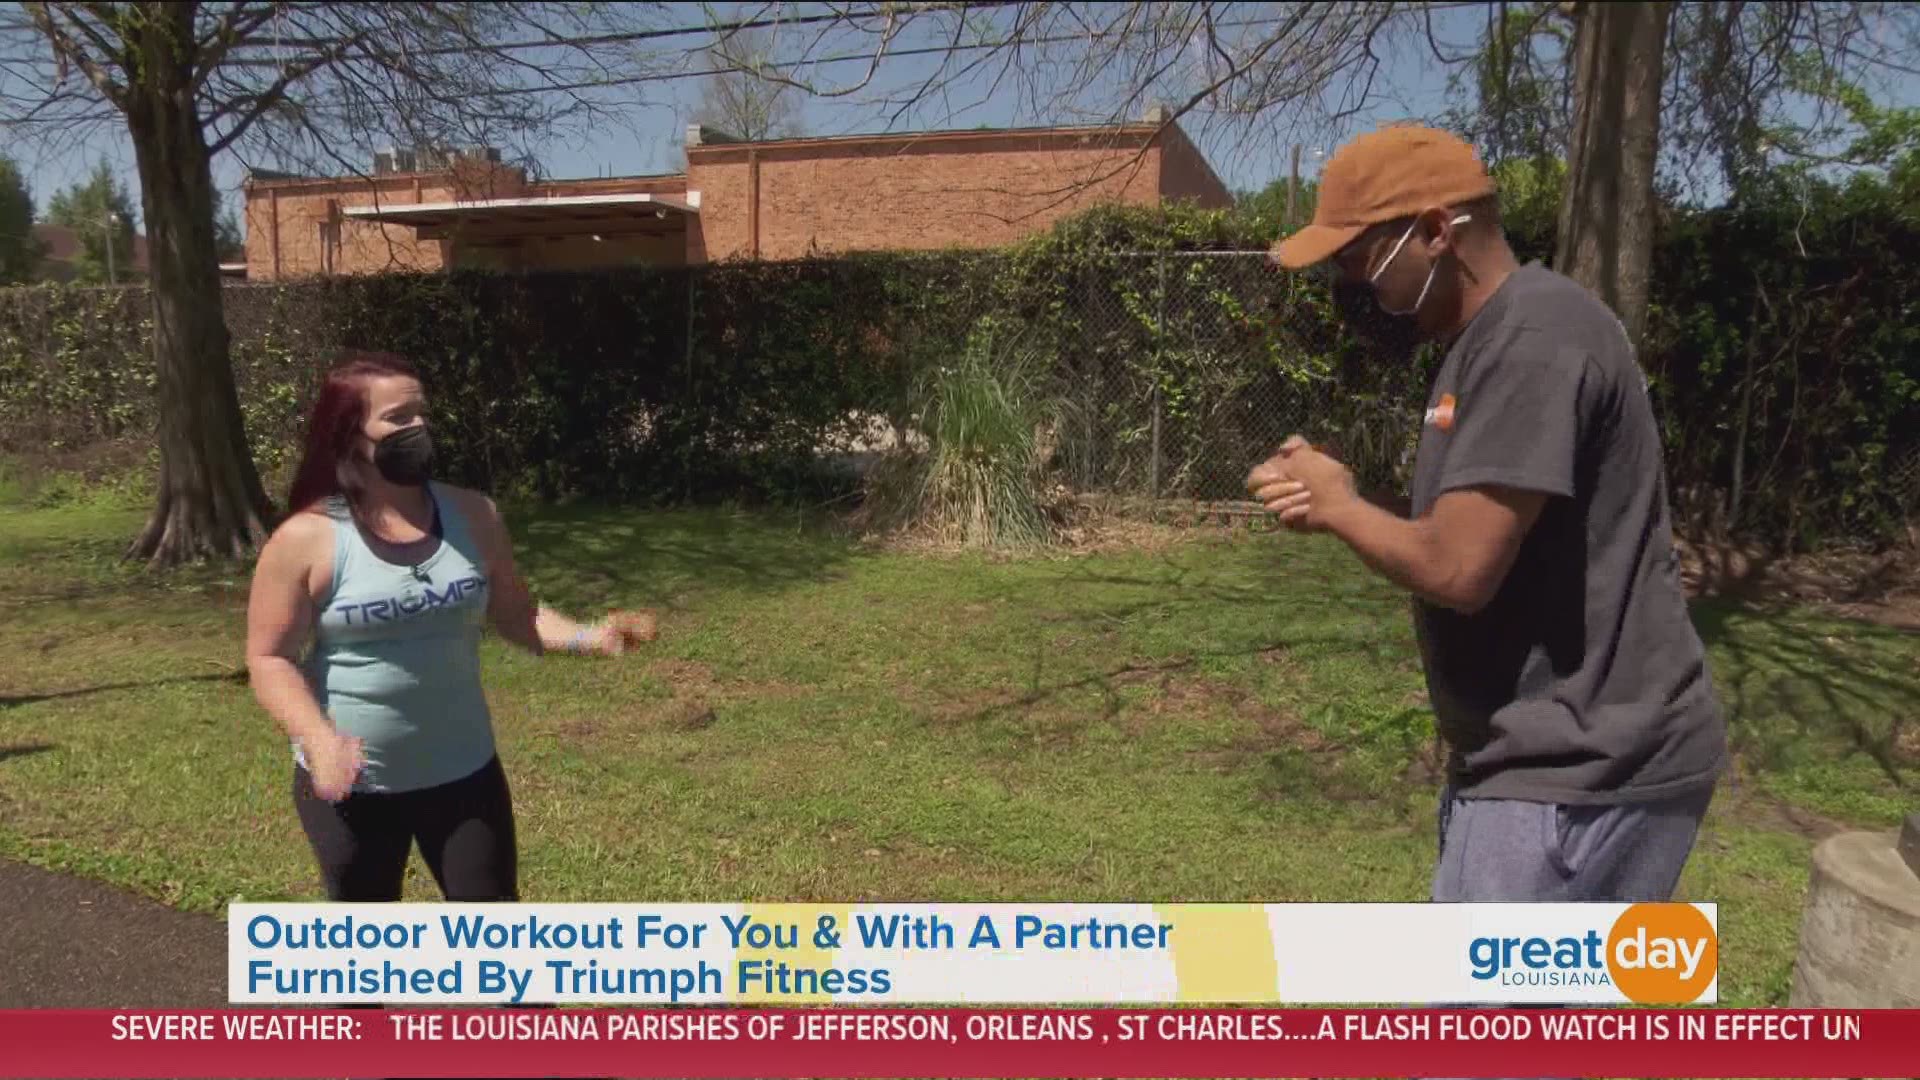 The owner of Triumph Fitness shared workout ideas people can do outdoors by themselves or with a partner.